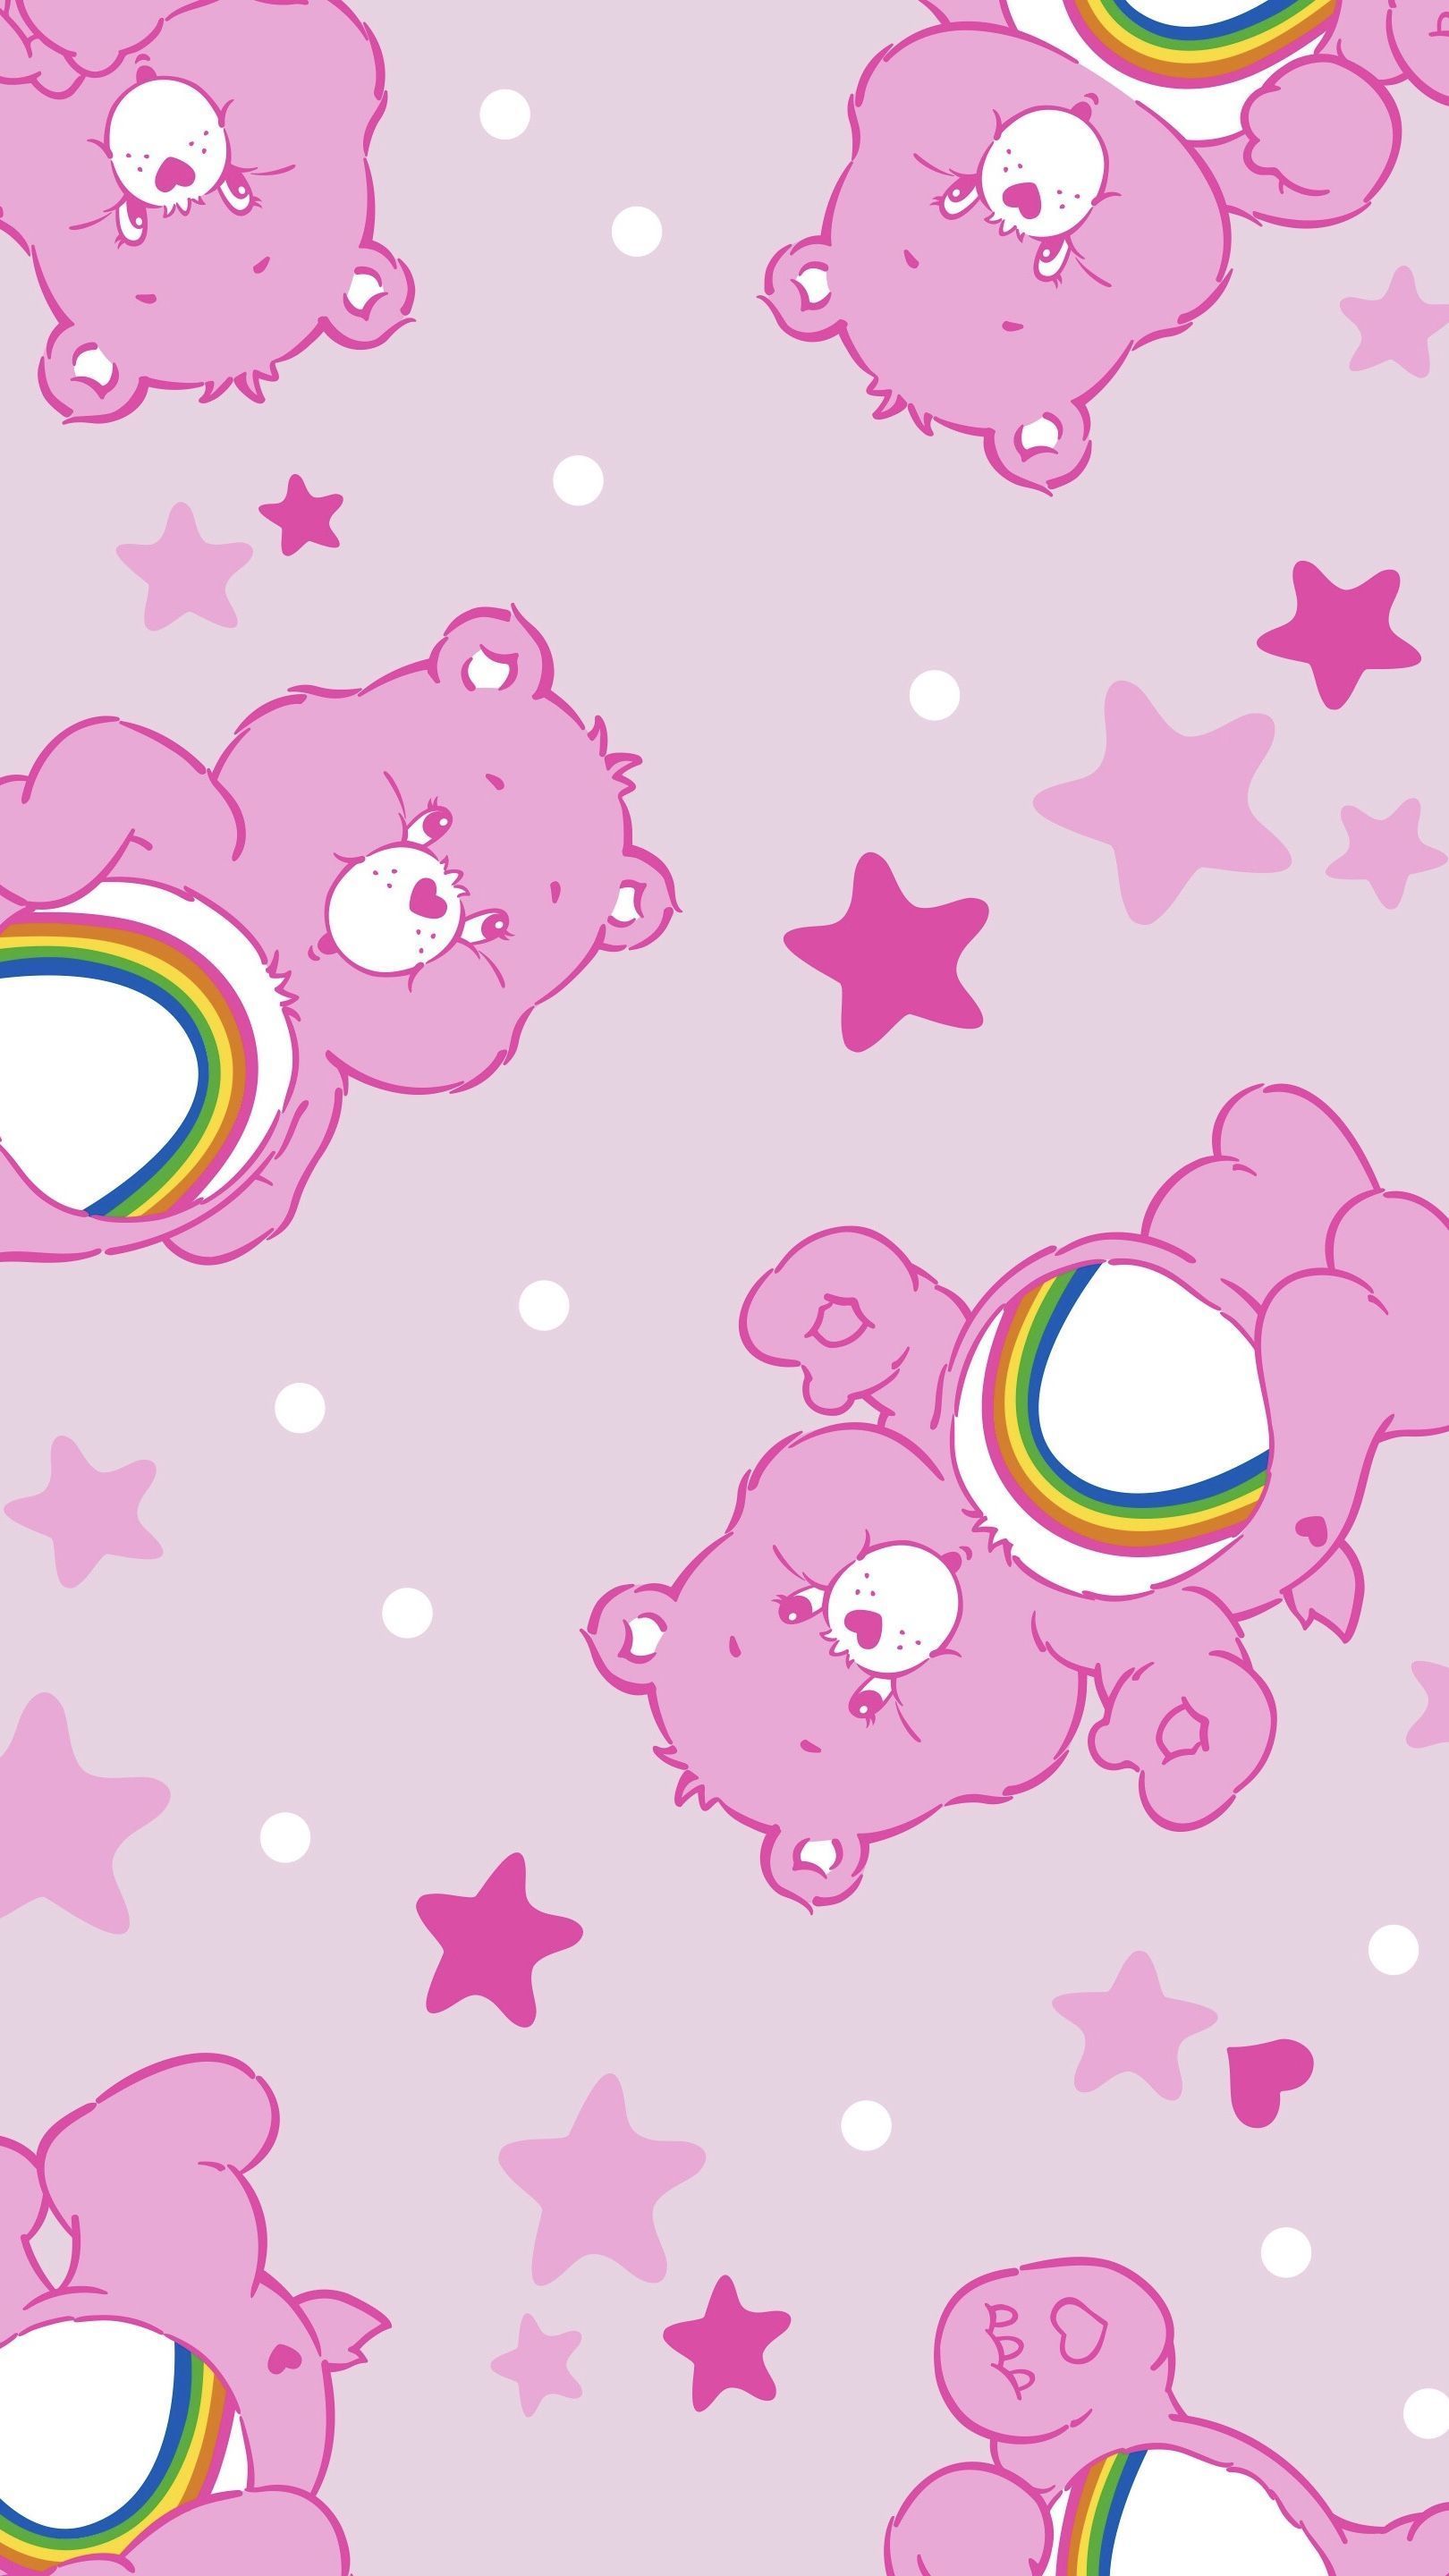 25 Top care bears aesthetic wallpaper desktop You Can Download It At No ...